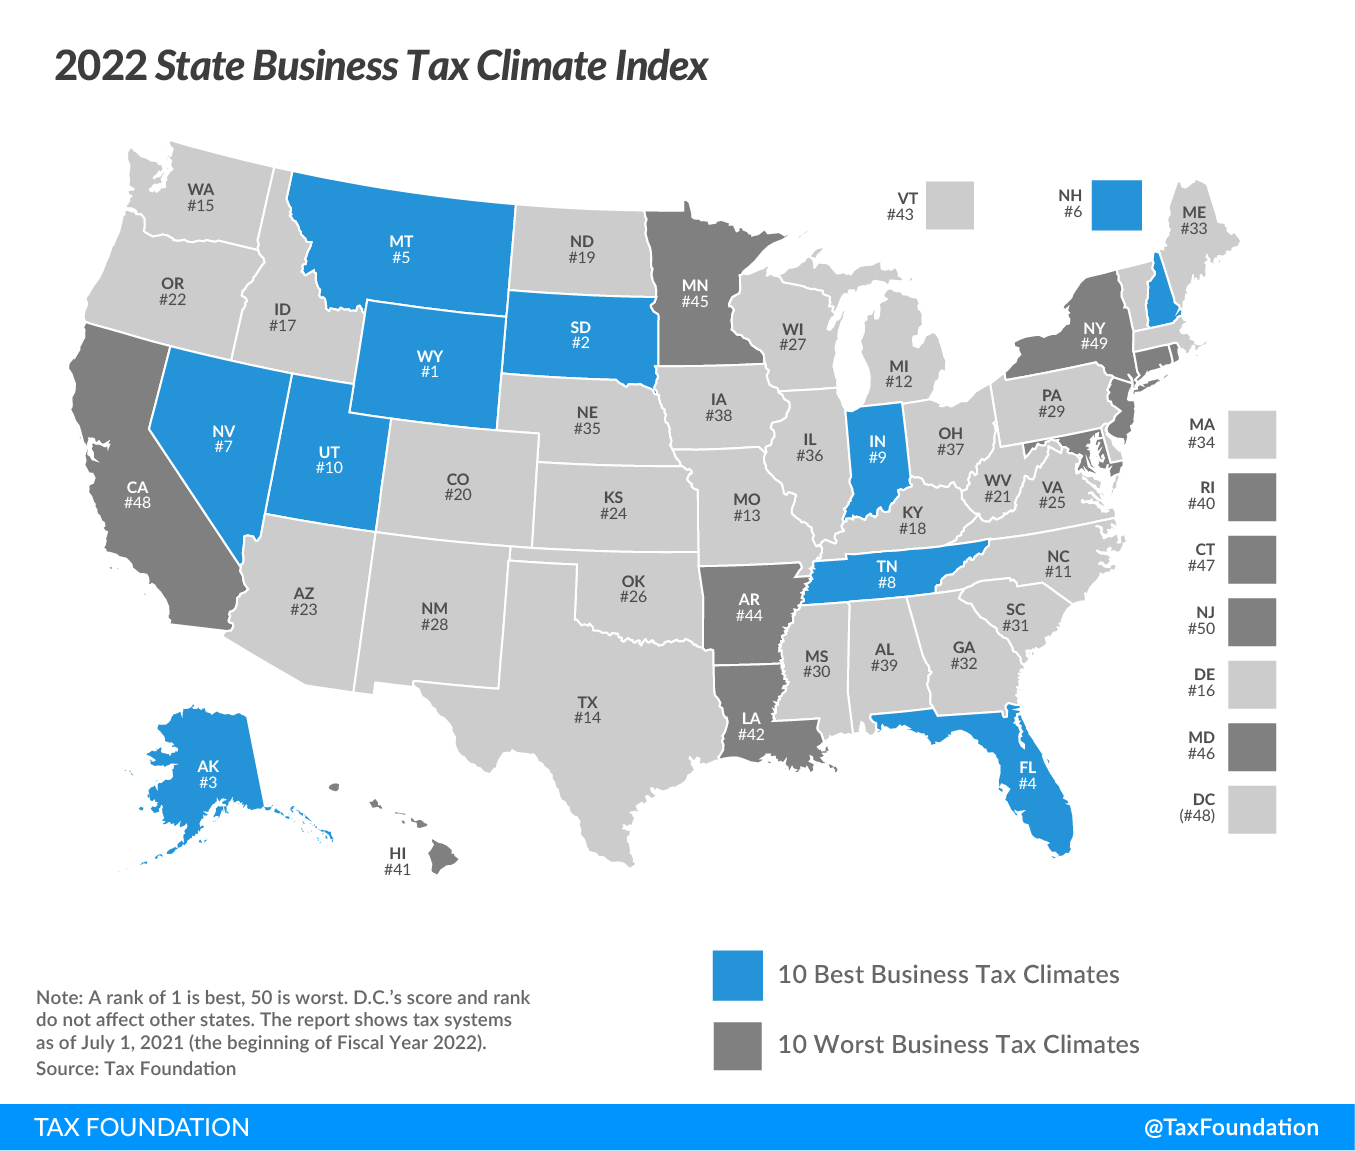 2022 State Business Tax Climate map graphic. Florida is show as one of the 10 Best Business Tax Climates.